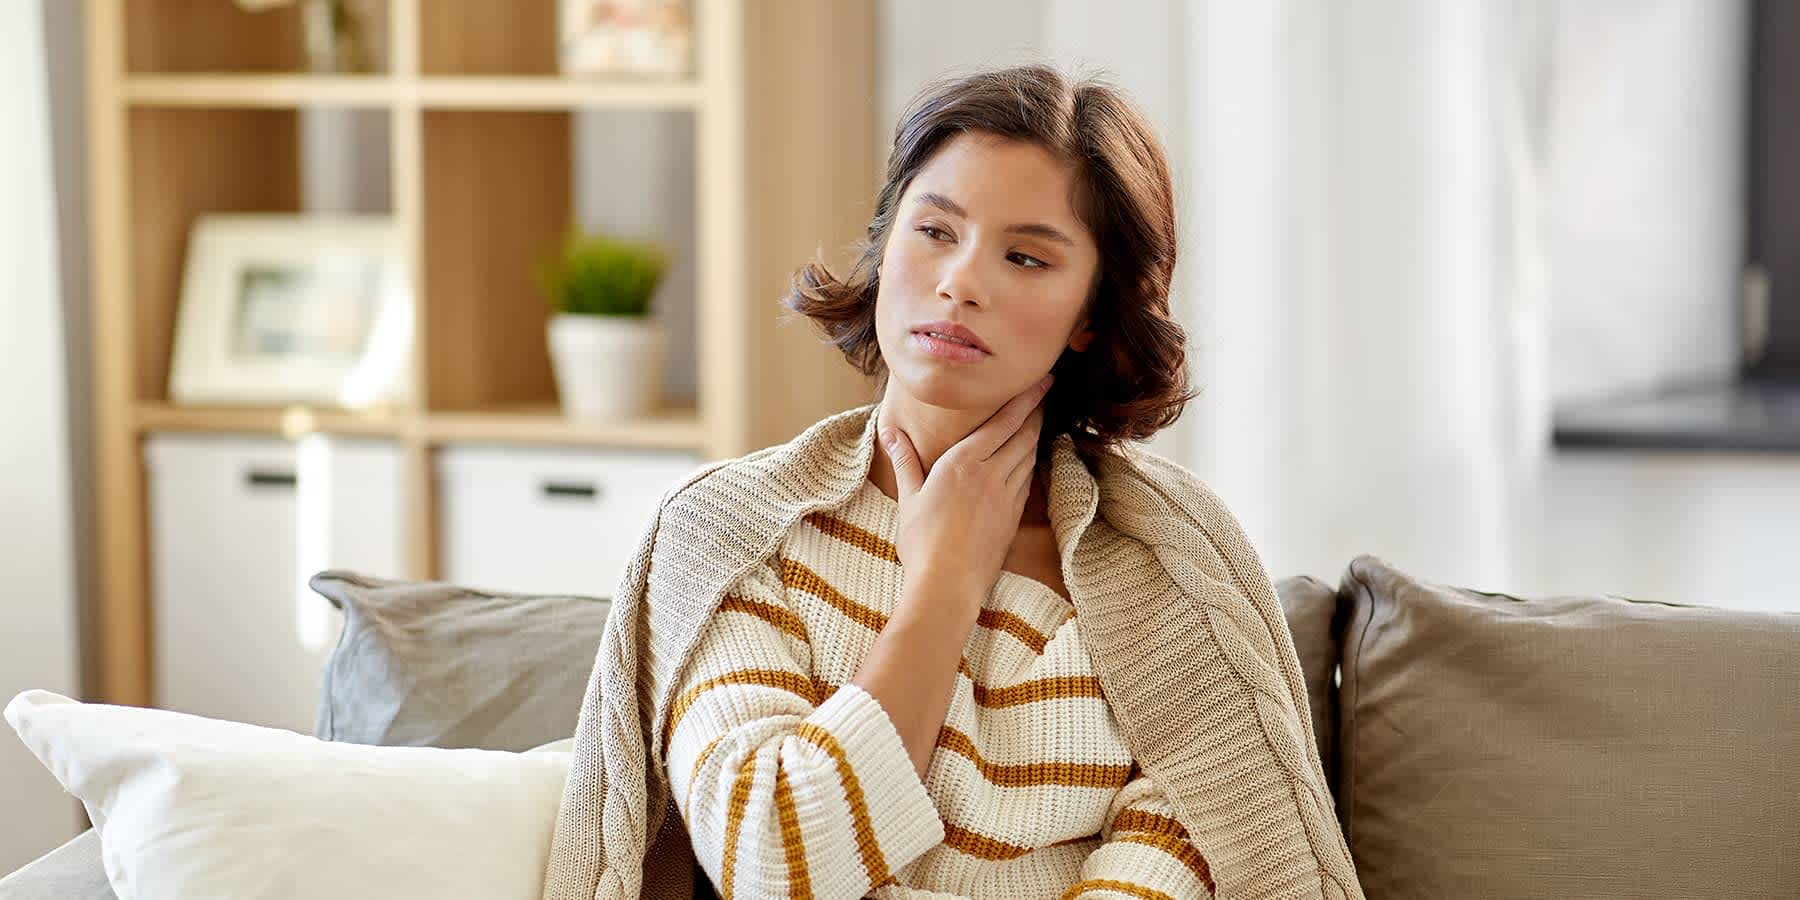 Woman sitting on couch with hand over neck and wondering about hypothyroidism vs. hyperthyroidism